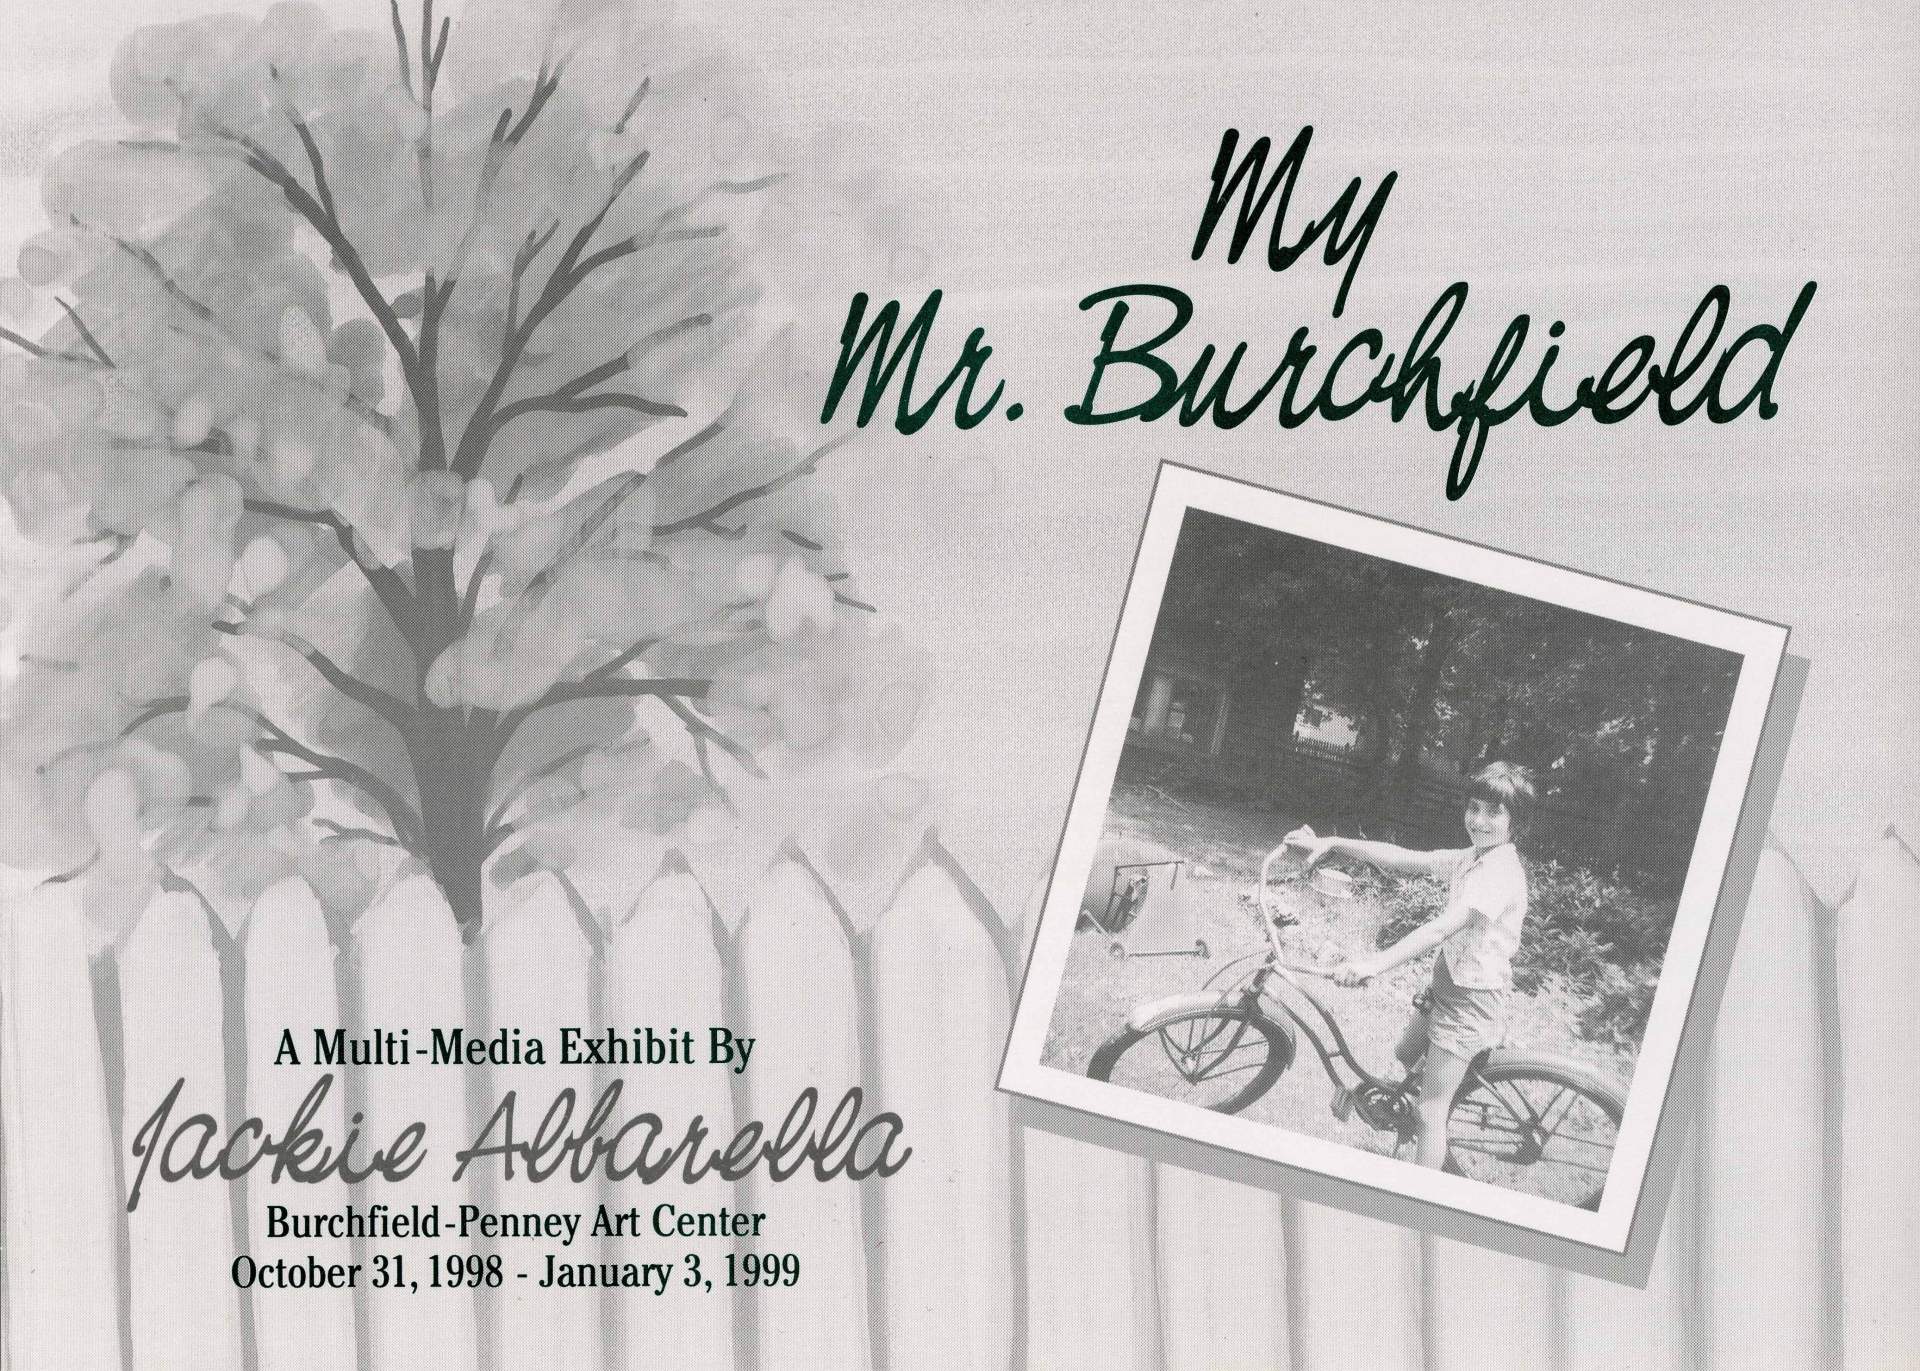 Flyer for "My Mister Burchfield" exhibition